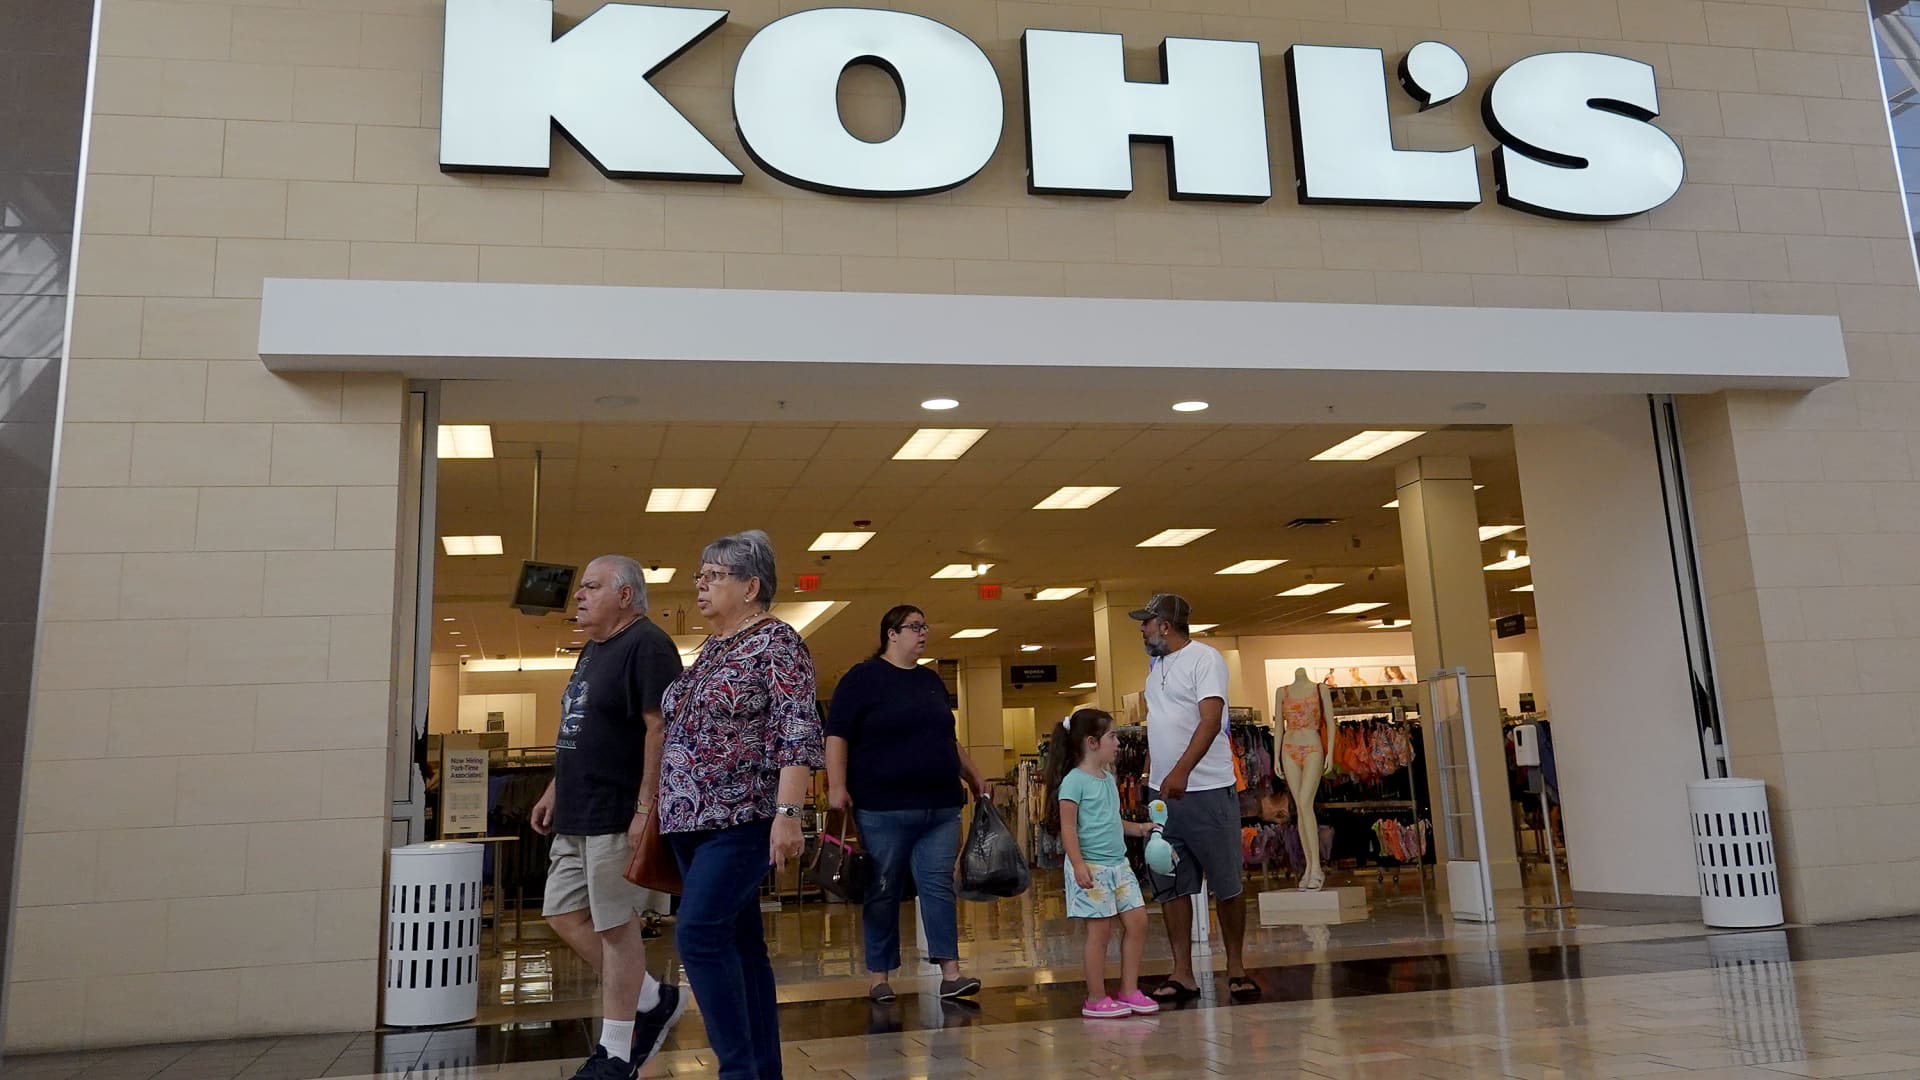 Franchise Group considers lowering Kohl's bid closer to $50 a share from about $60, source says